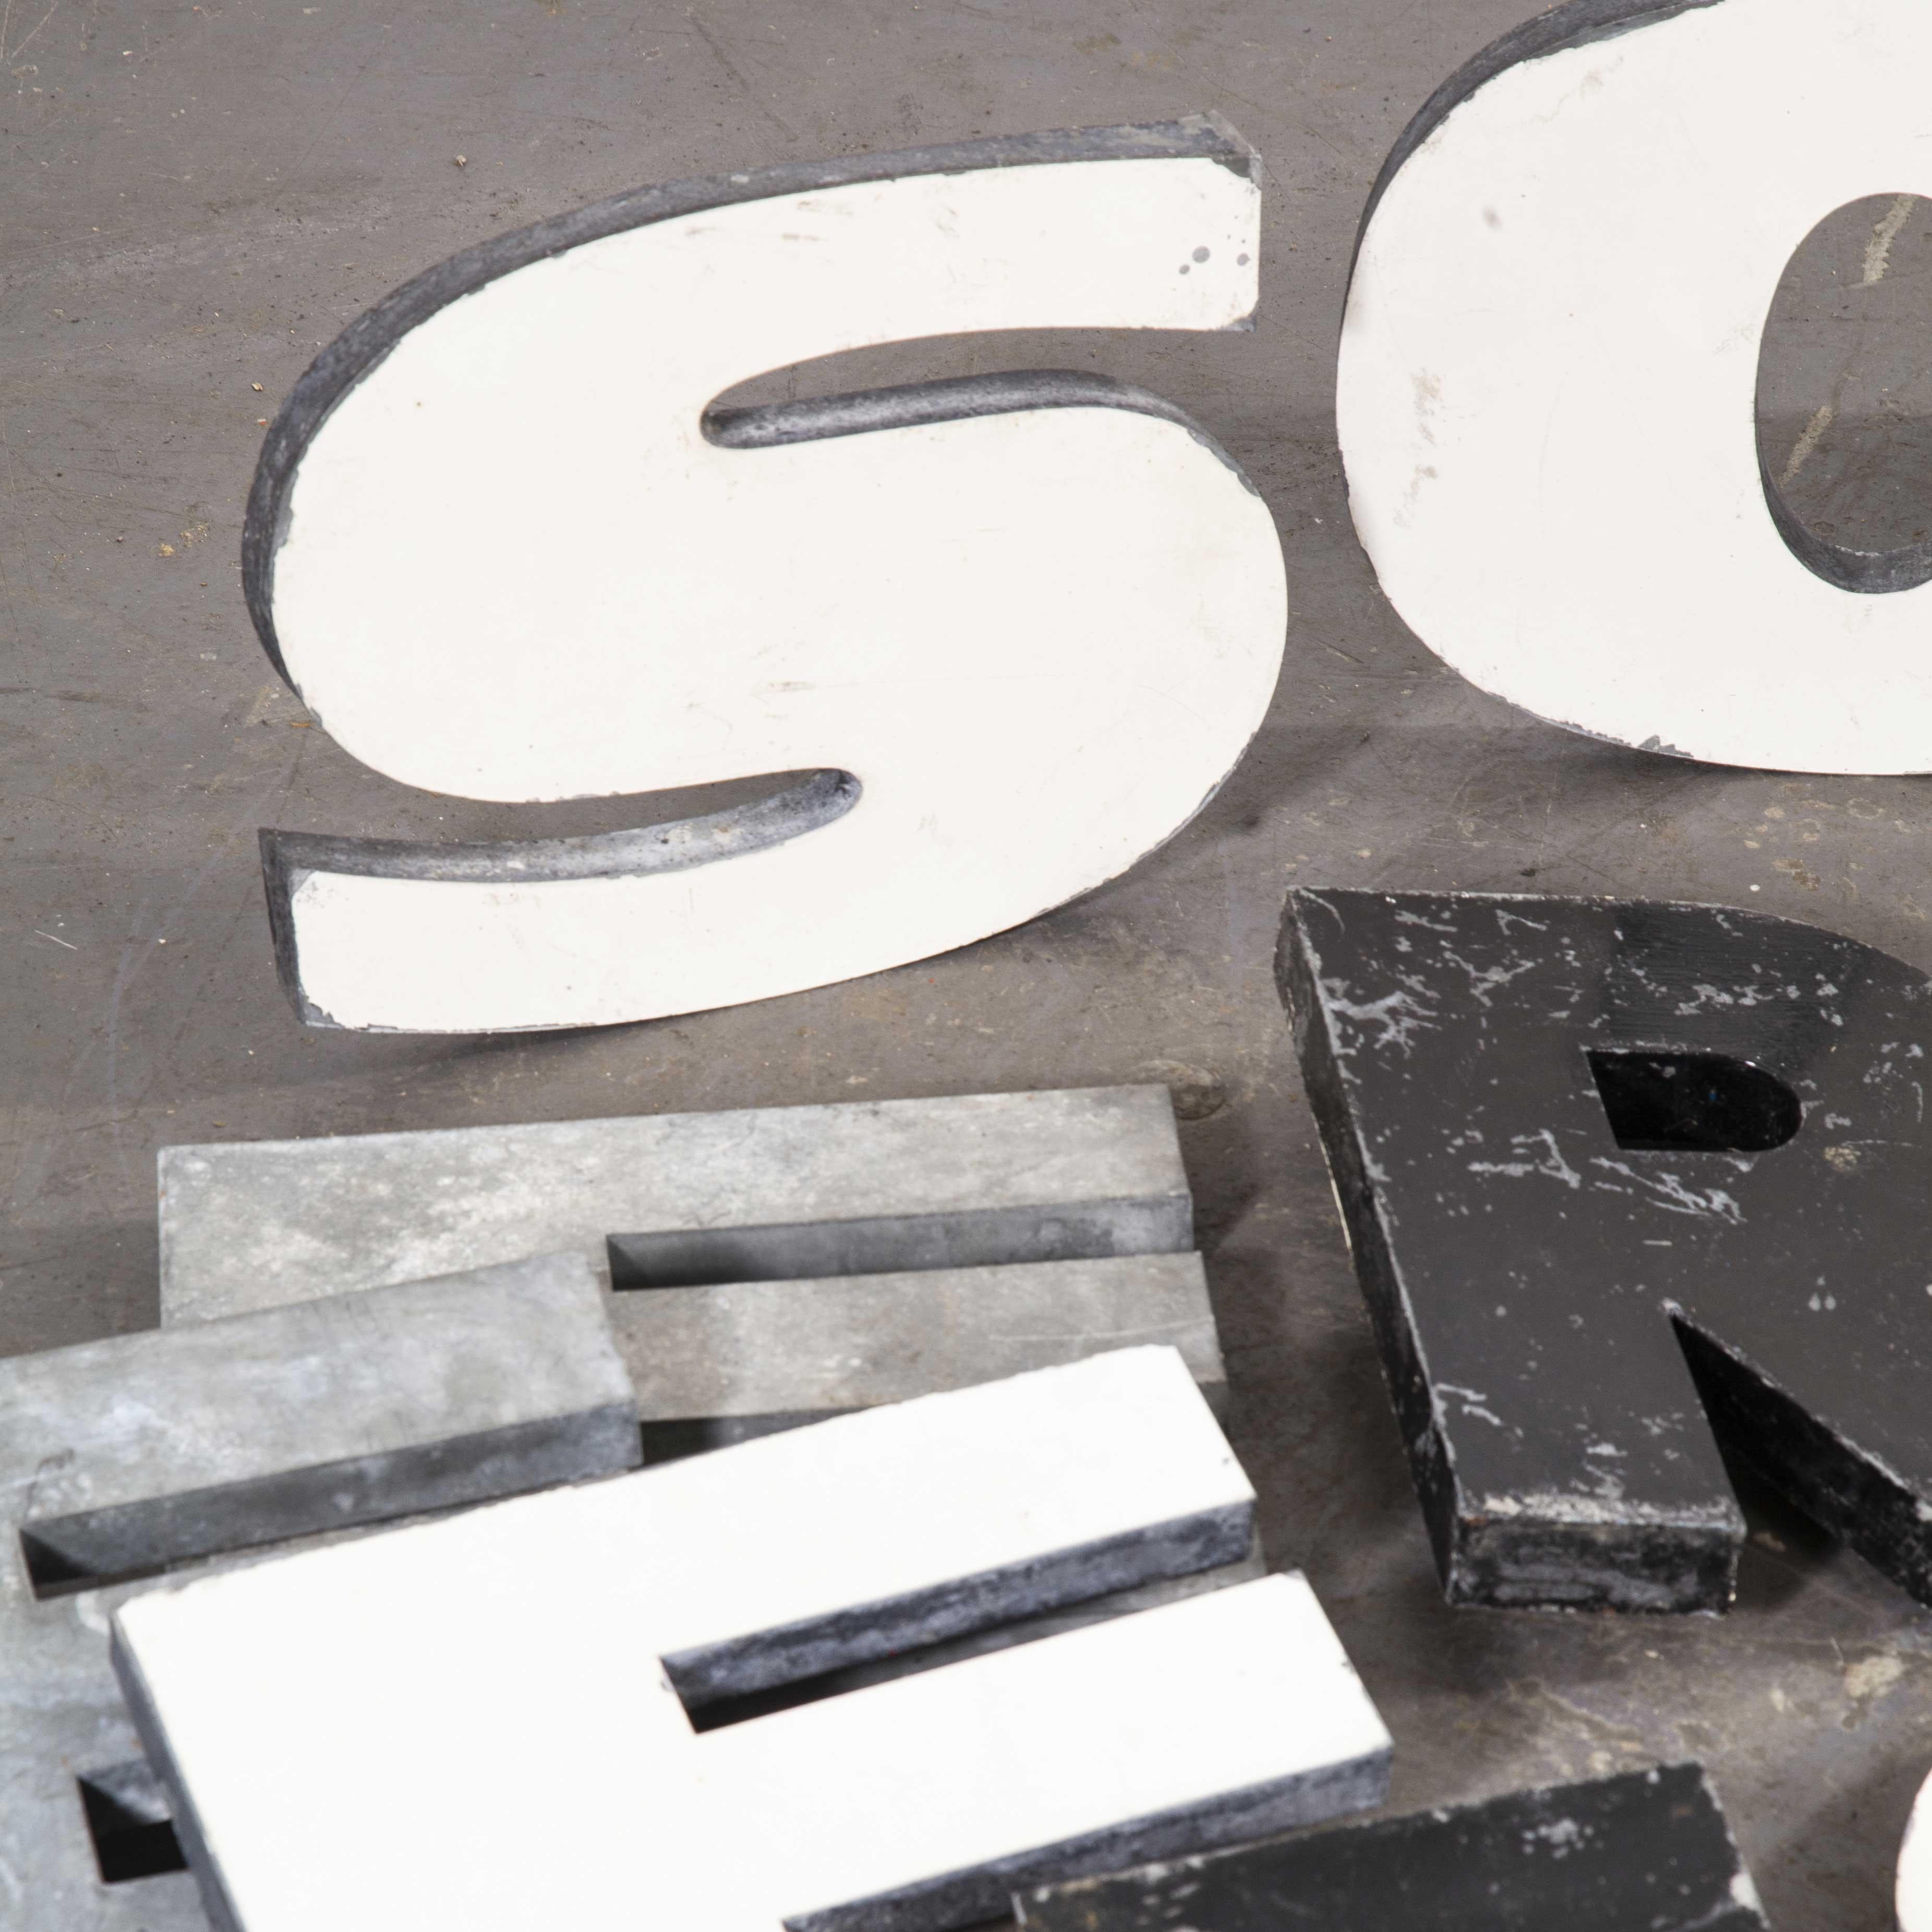 1950s French zinc letters - letter zinc S

1950s French zinc letters - letter zinc S. We have 19 of these well worn and very beautiful zinc letters which look beautiful as decorative pieces in their own right or are frequently bought as customer